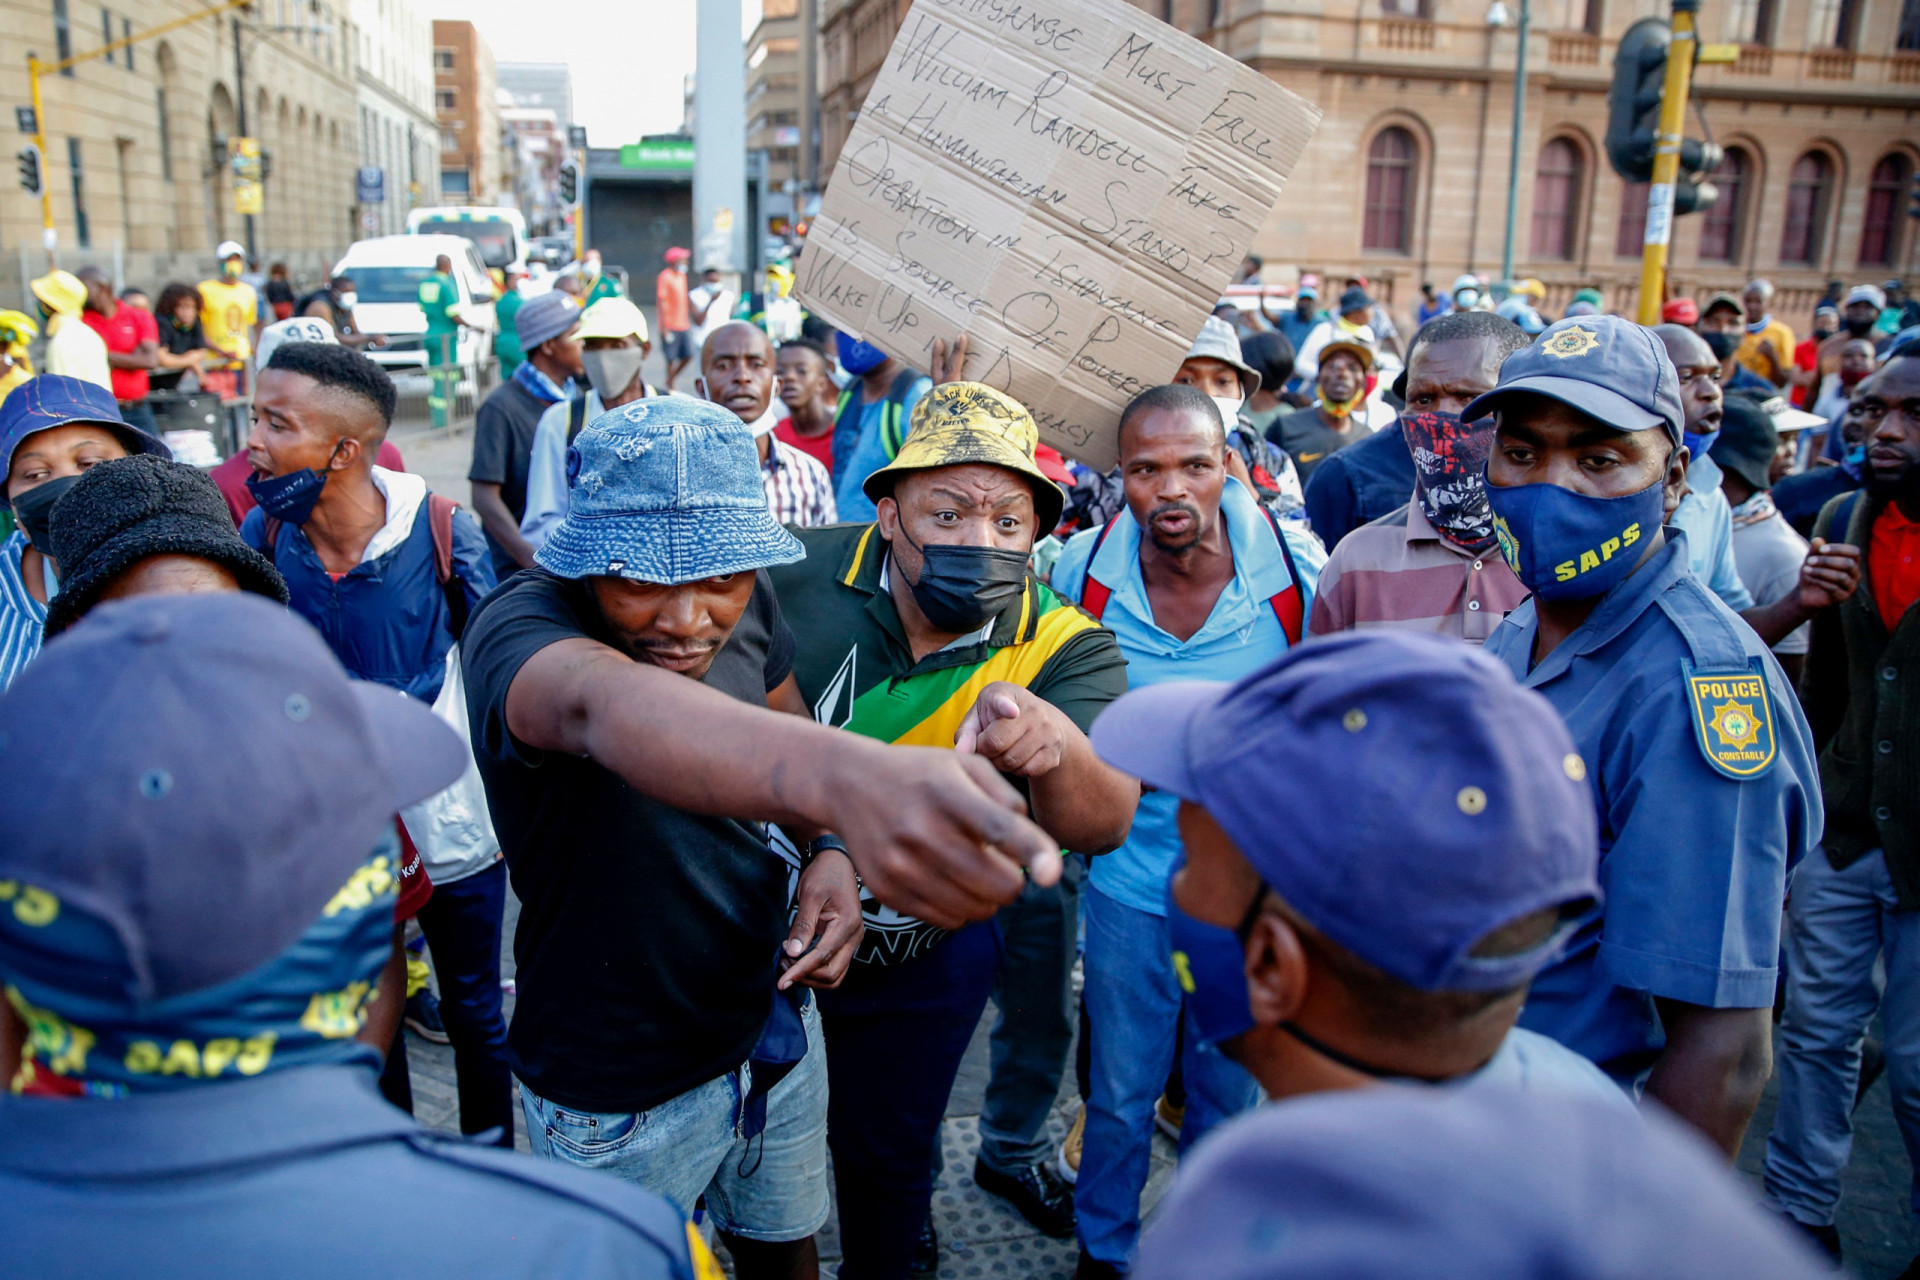 <p>Landing the number one spot of Africa's most dangerous cities is Pretoria, with a Crime Index score of 81.8.</p><p><a href="https://www.msn.com/en-us/community/channel/vid-7xx8mnucu55yw63we9va2gwr7uihbxwc68fxqp25x6tg4ftibpra?cvid=94631541bc0f4f89bfd59158d696ad7e">Follow us and access great exclusive content every day</a></p>